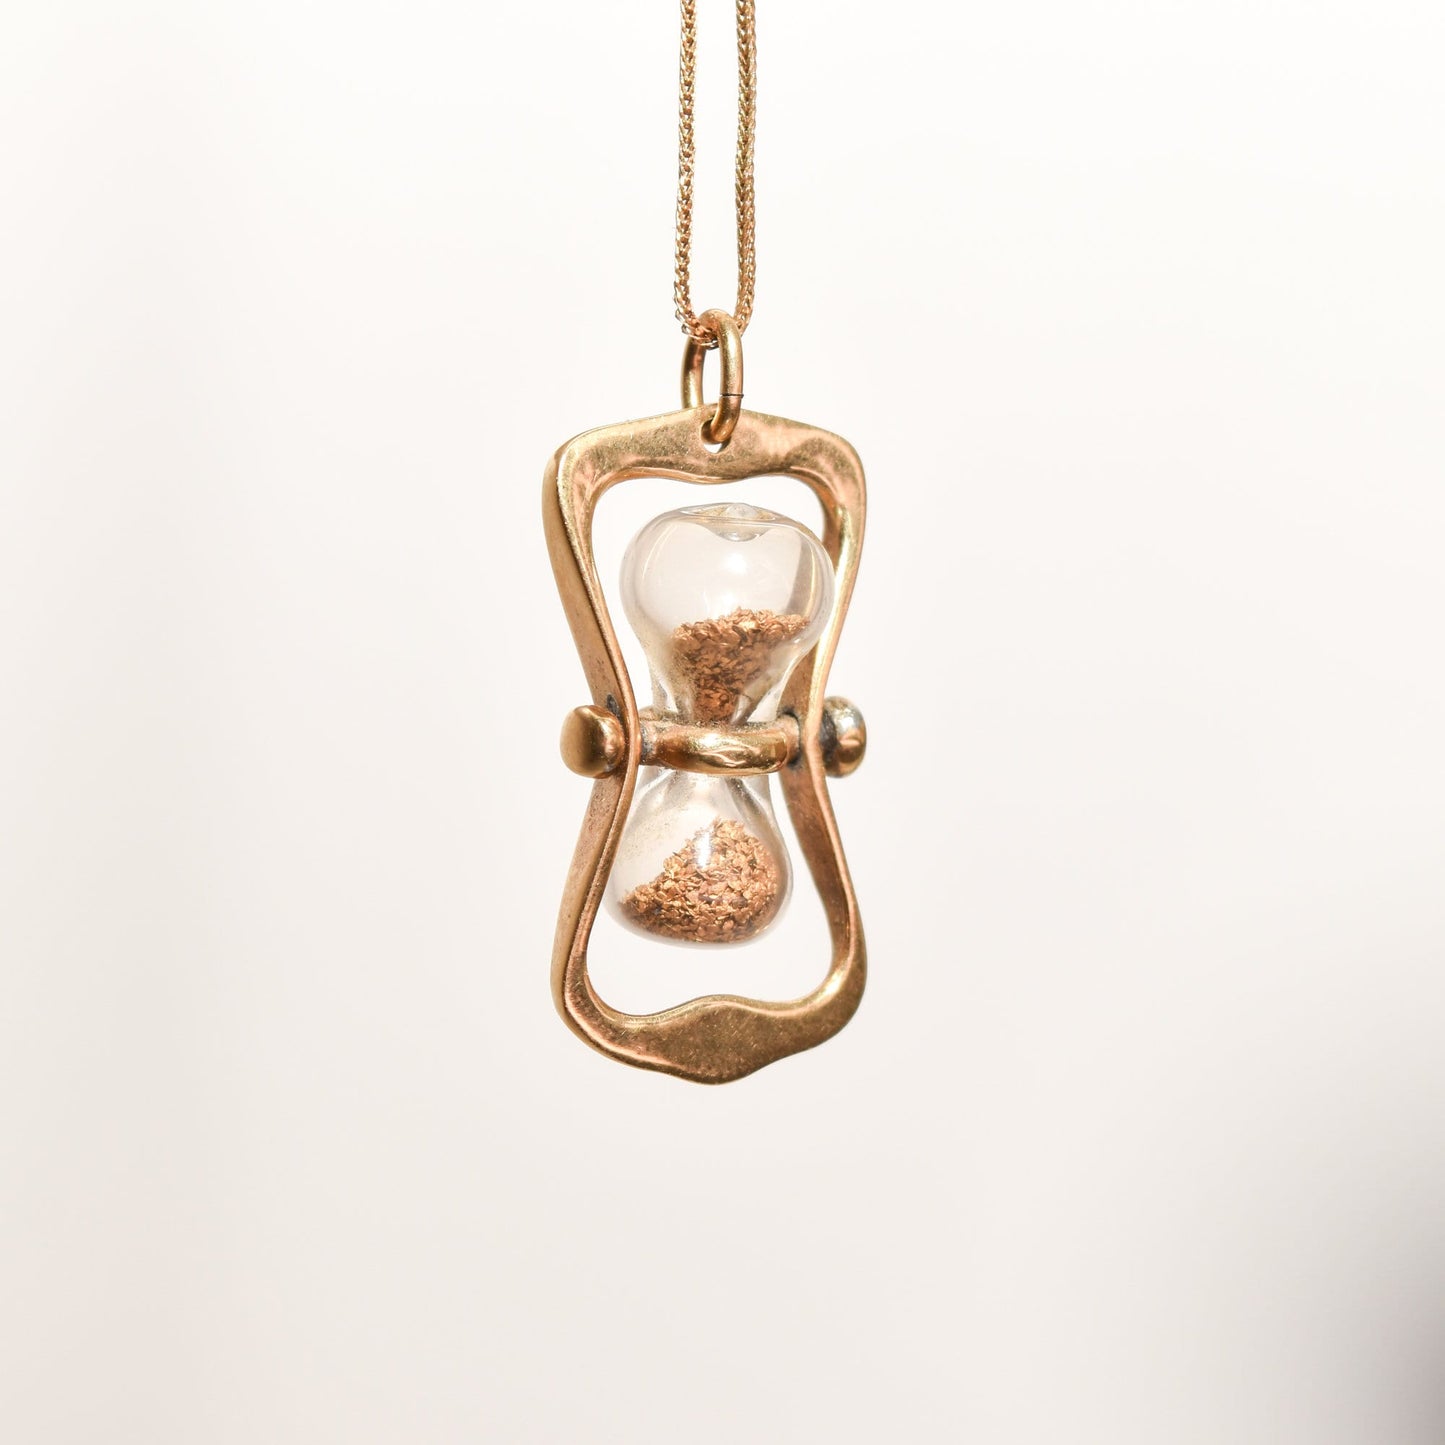 14K gold hourglass pendant with movable swivel mechanism and sparkling gold dust, estate jewelry piece measuring 36mm, suspended from a gold chain.